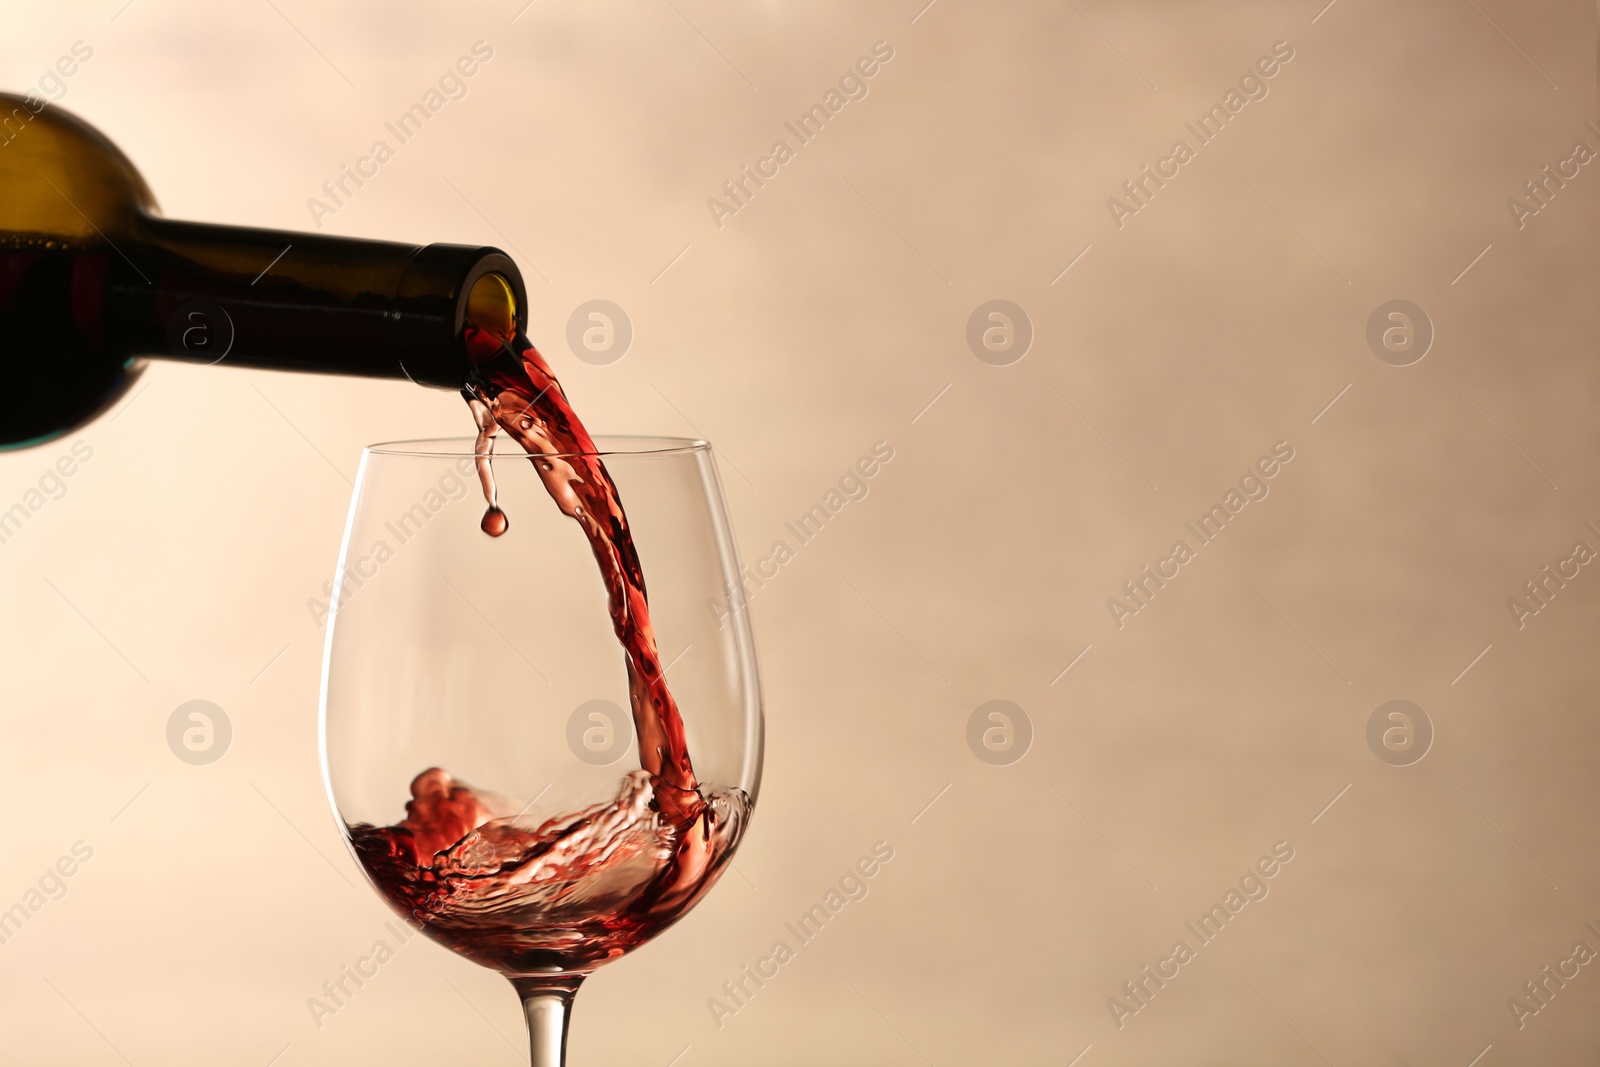 Photo of Pouring red wine into glass from bottle against blurred beige background, closeup. Space for text